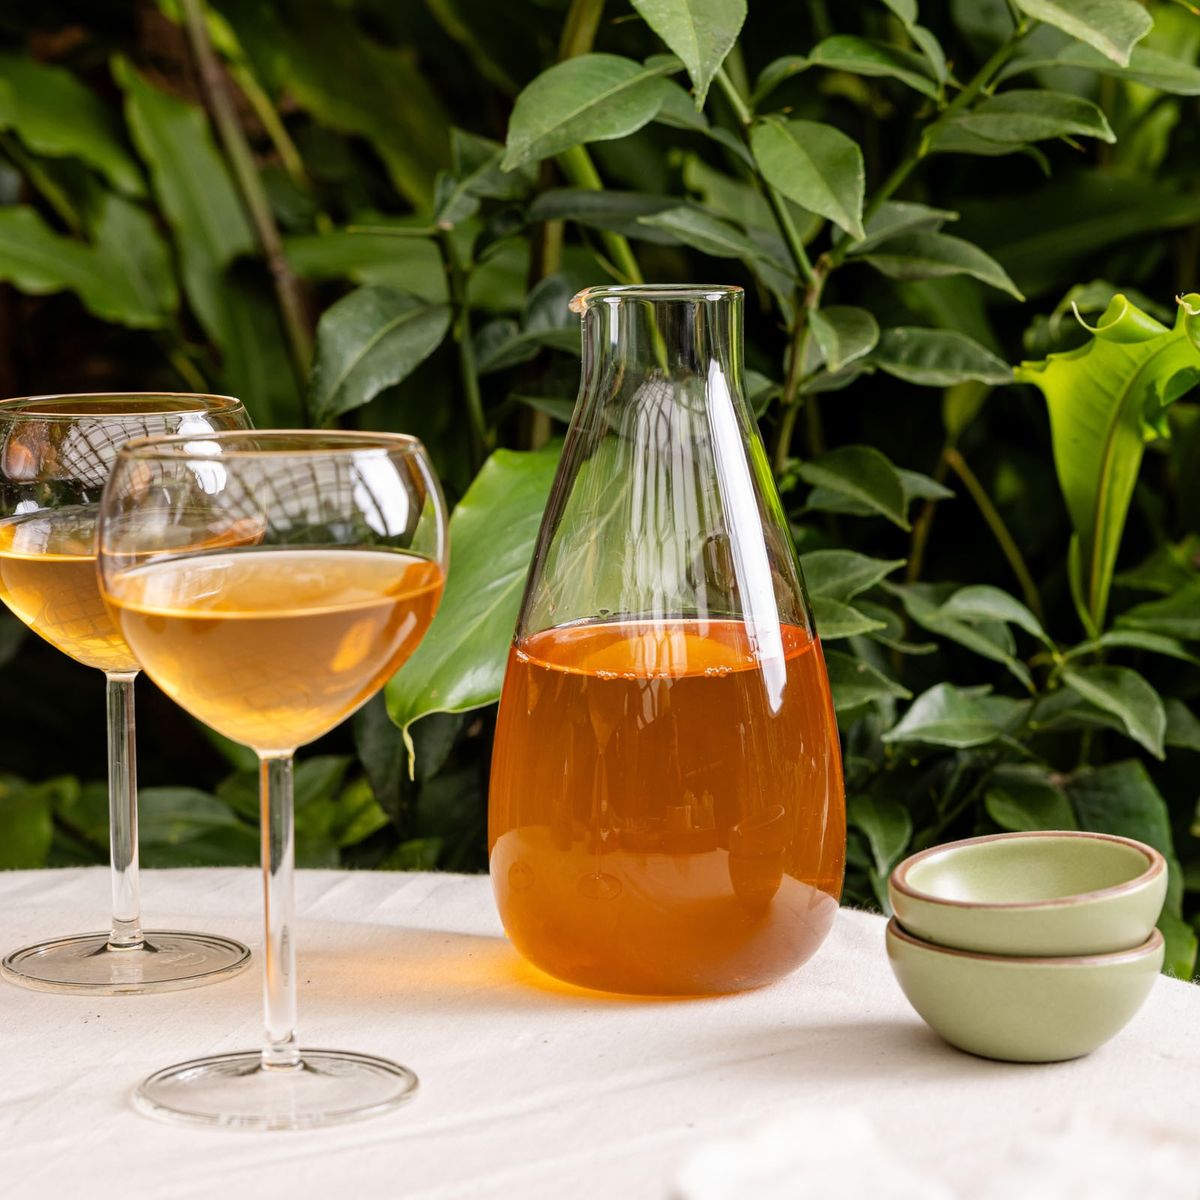 On a table outdoors, sits 2 simple wine glasses with a sophisticated tall glass wine carafe, filled with orange wine. To the right is 2 stacked tiny bowls in a sage green color.